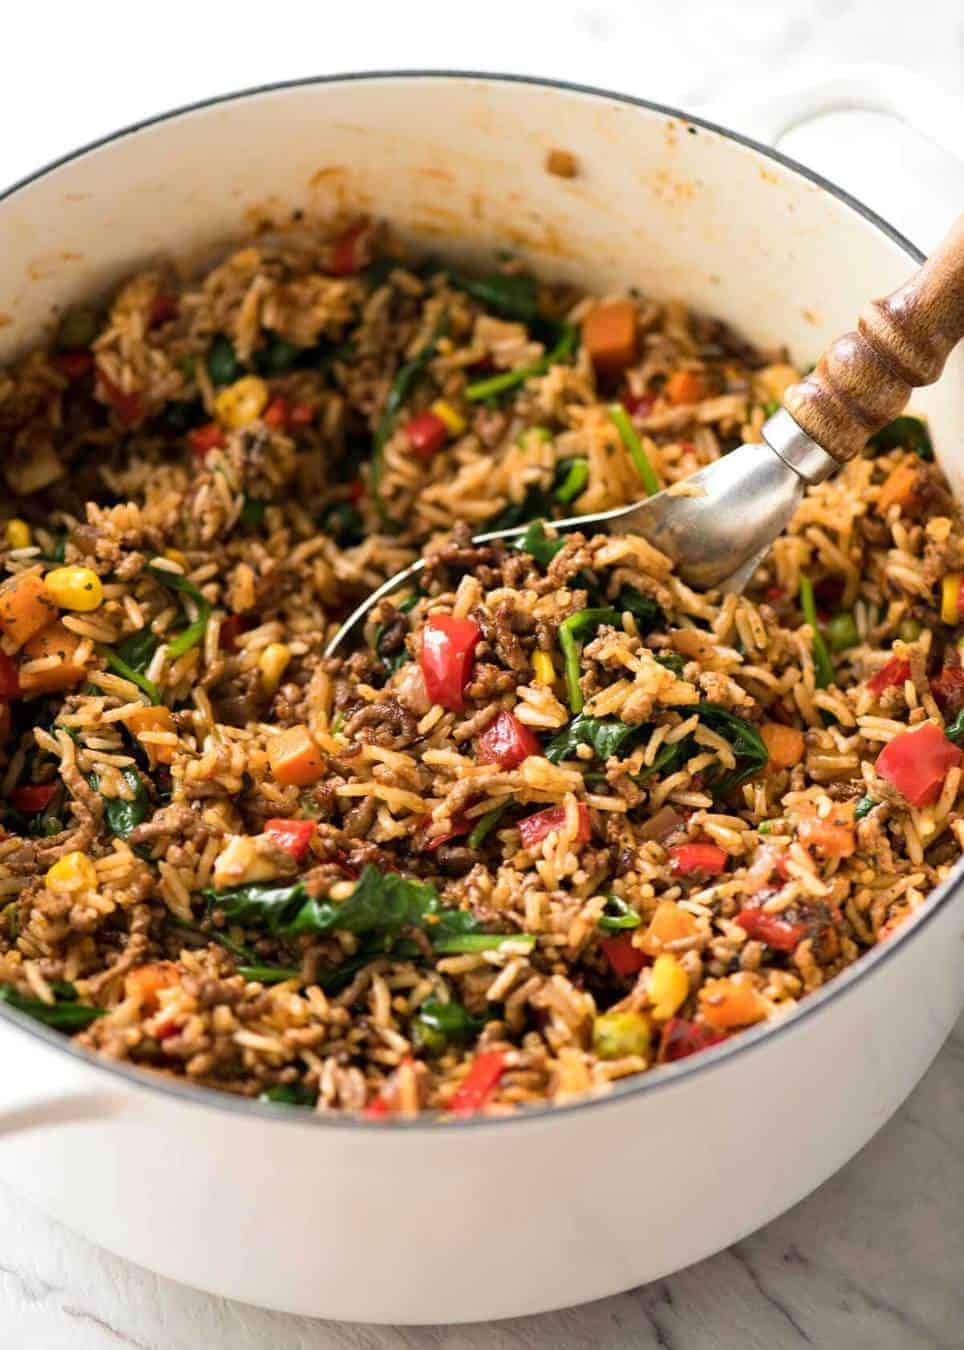 A quick, fabulous midweek meal - this ground Beef and Rice is made by browning ground beef, then cooking it with flavoured rice and loads of veggies. Irresistibly delicious! www.recipetineats.com